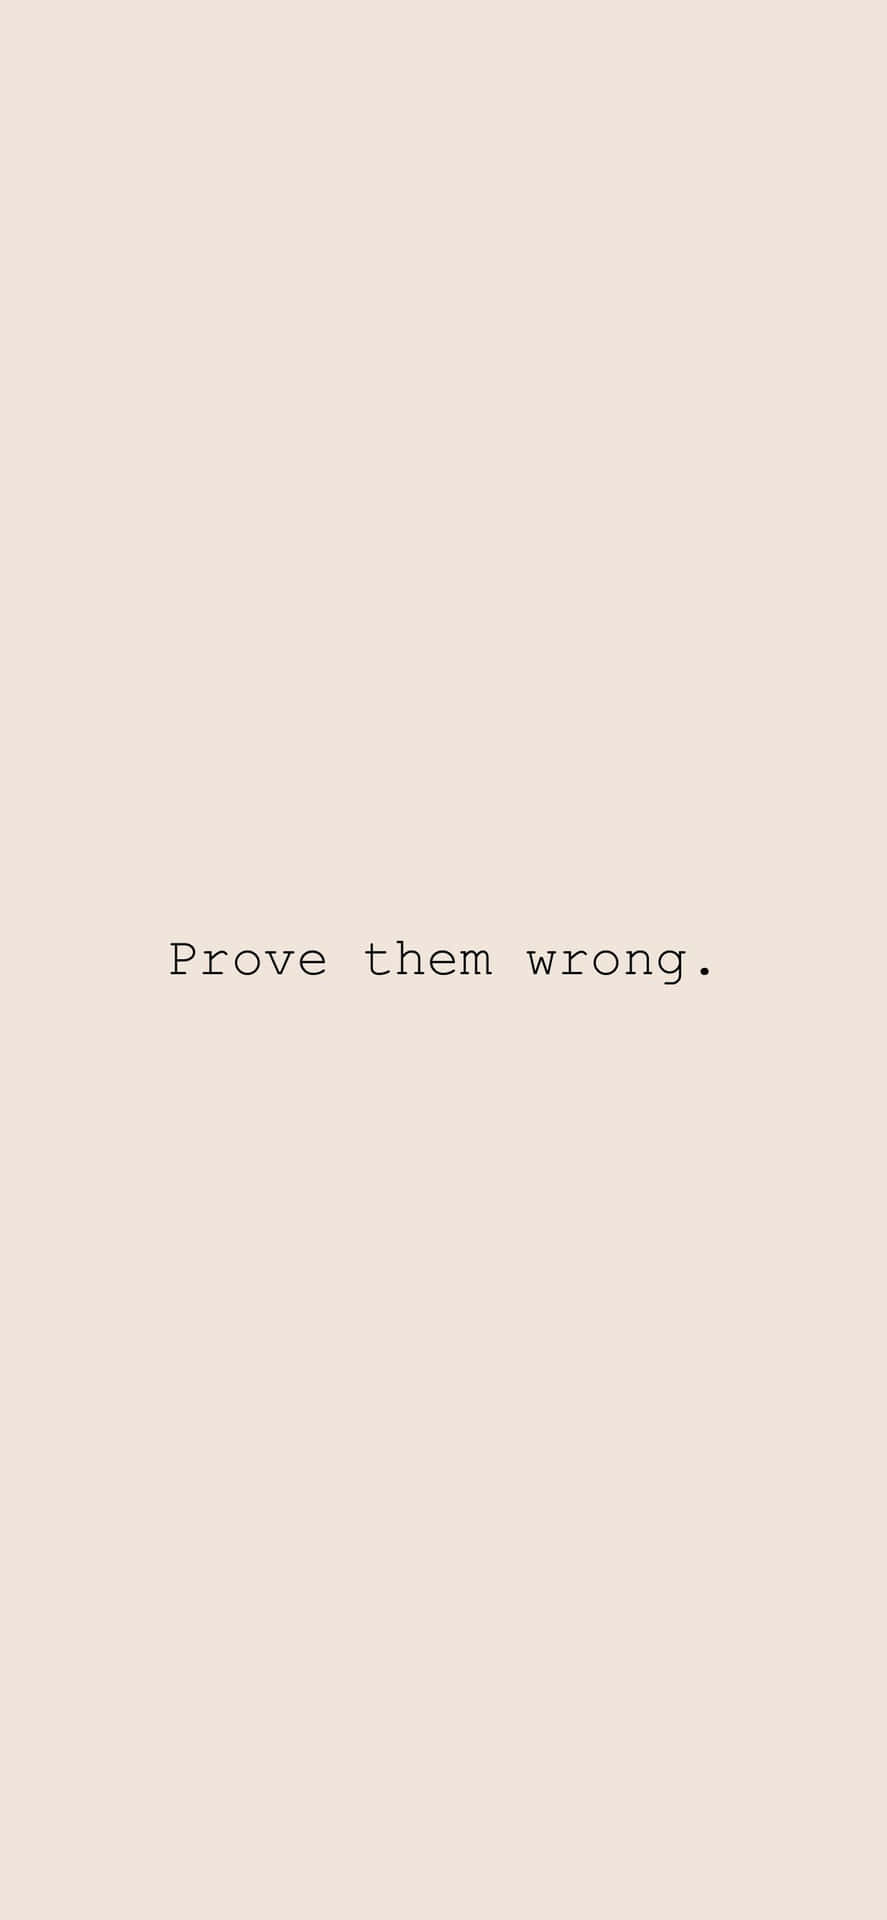 Motivational Quote Prove Them Wrong Wallpaper